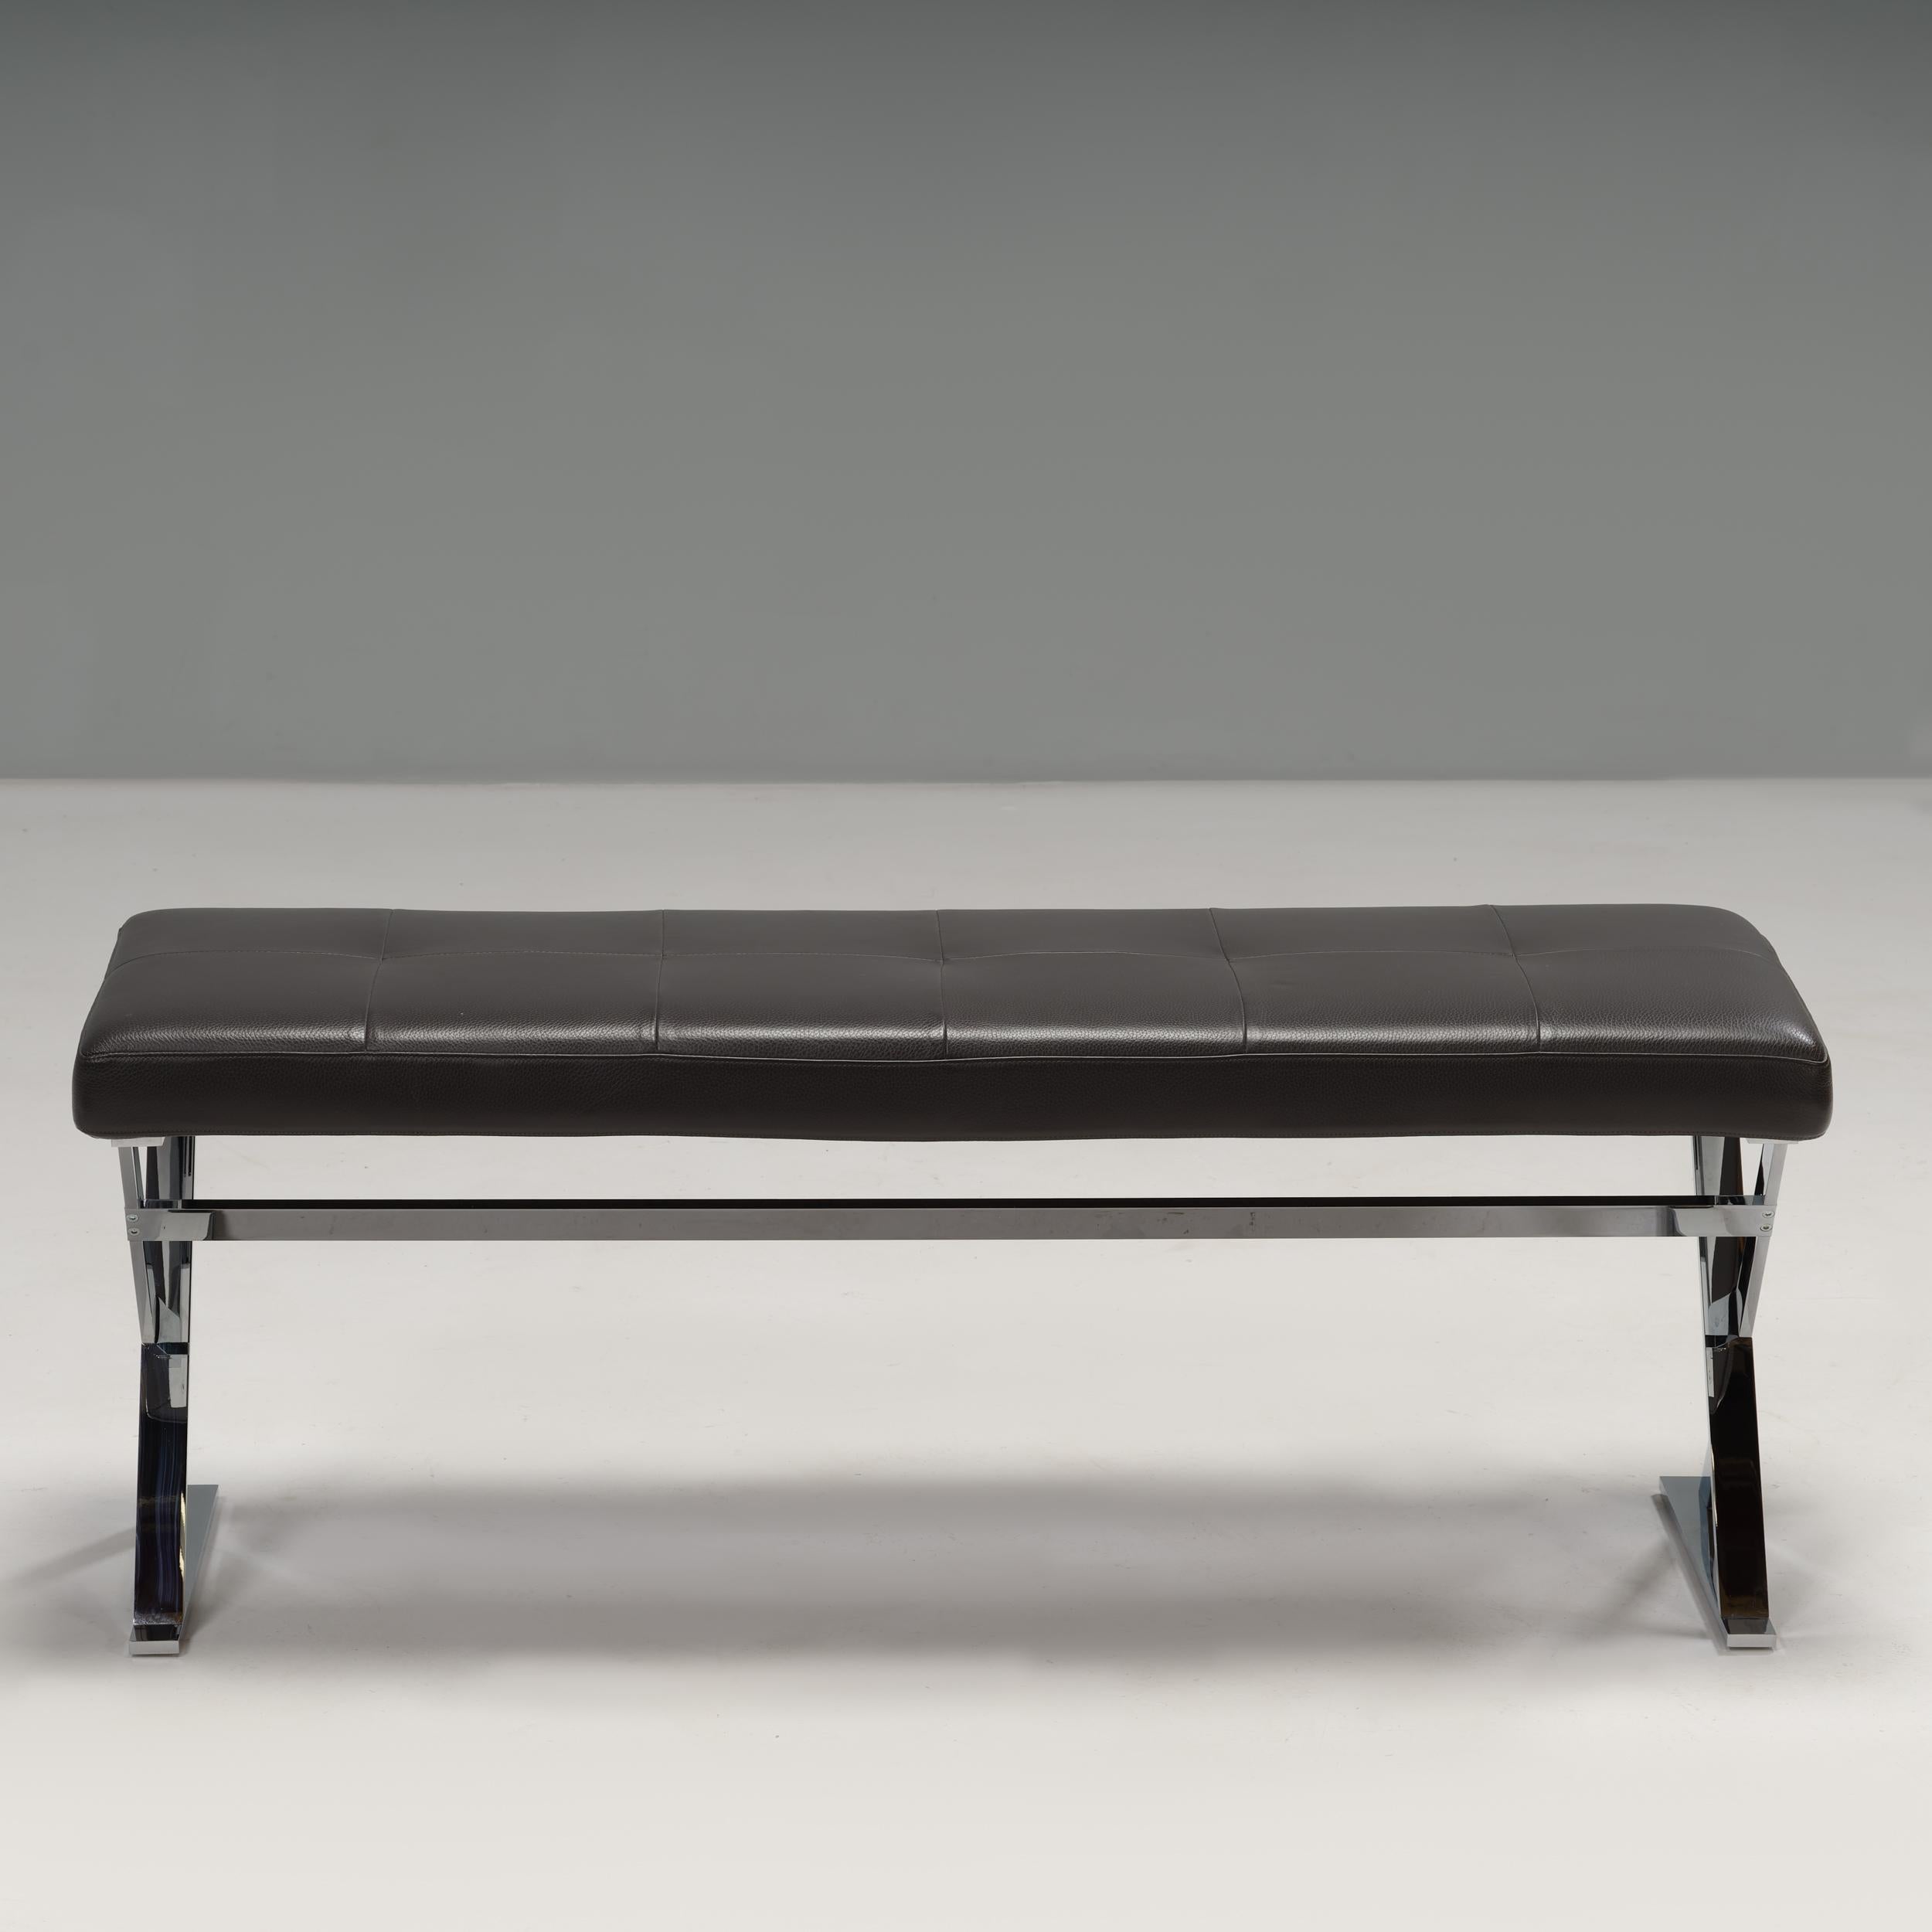 Designed by Antonio Citterio for Maxalto, the Pathos bench is a versatile design.

Constructed from a bright chrome cross-frame base, the bench features a seat cushion upholstered in black leather with a quilted detail.

Practical and chic, this